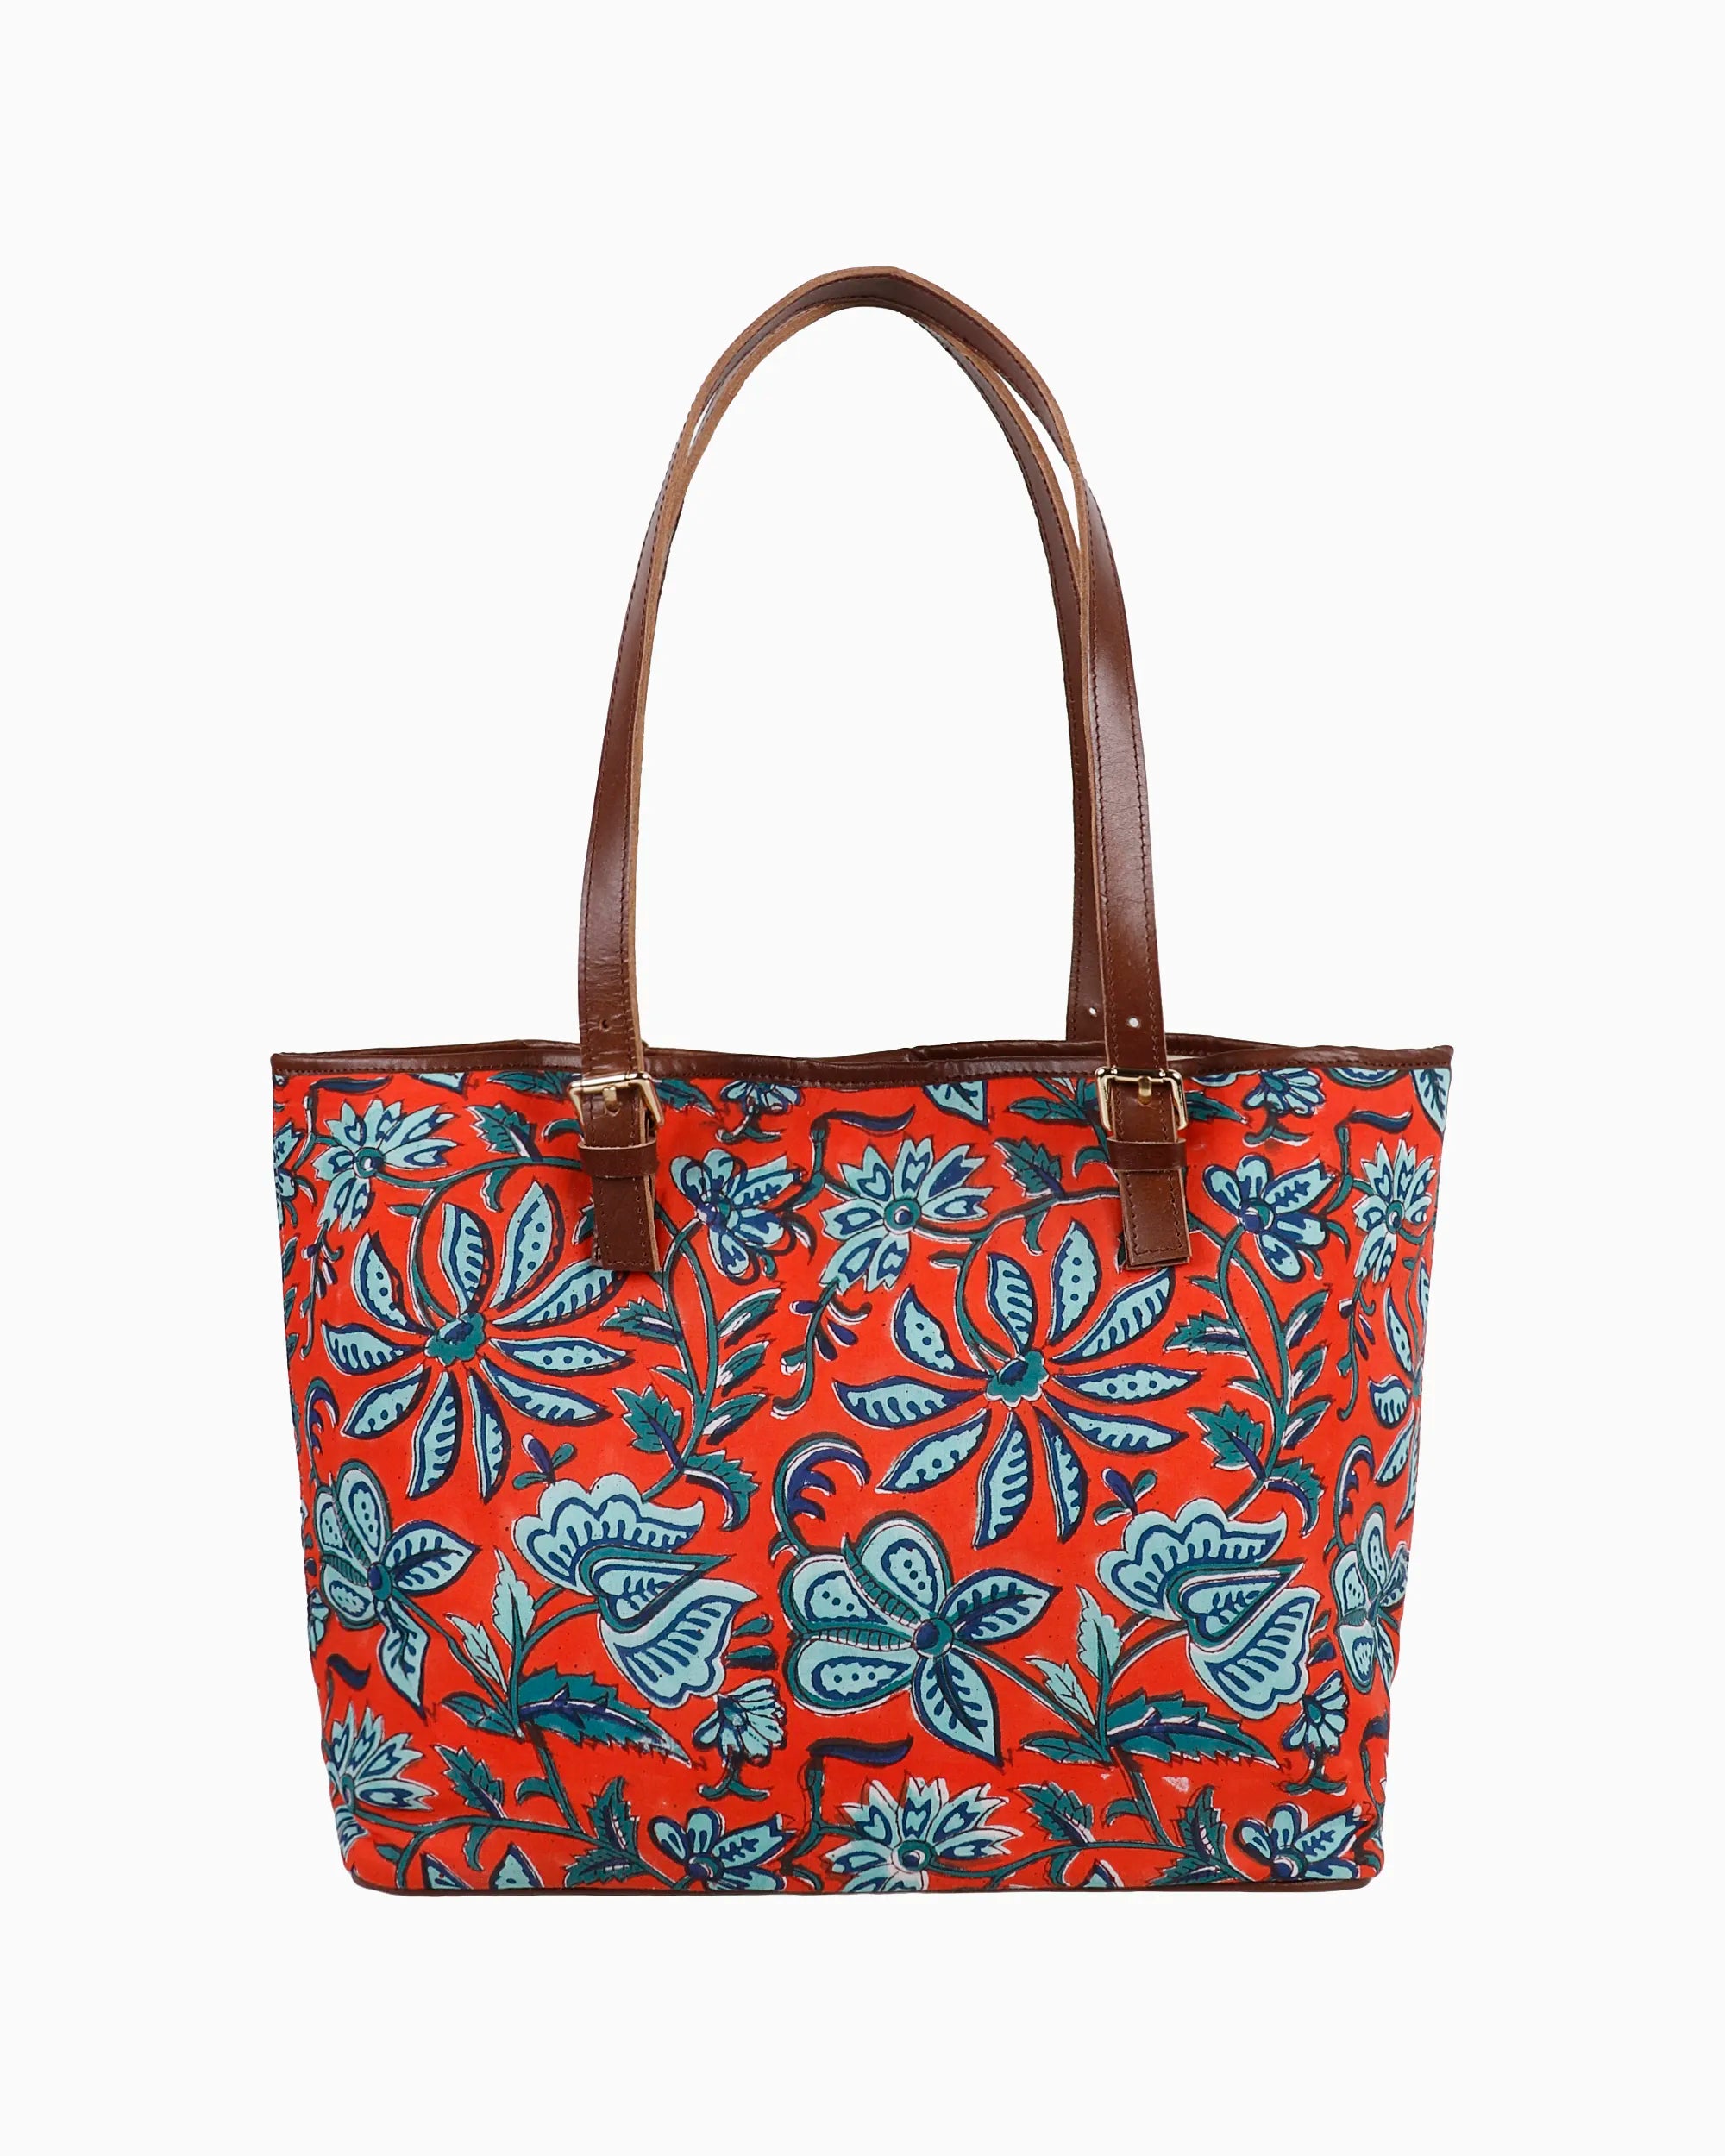 Forest Tote Bag